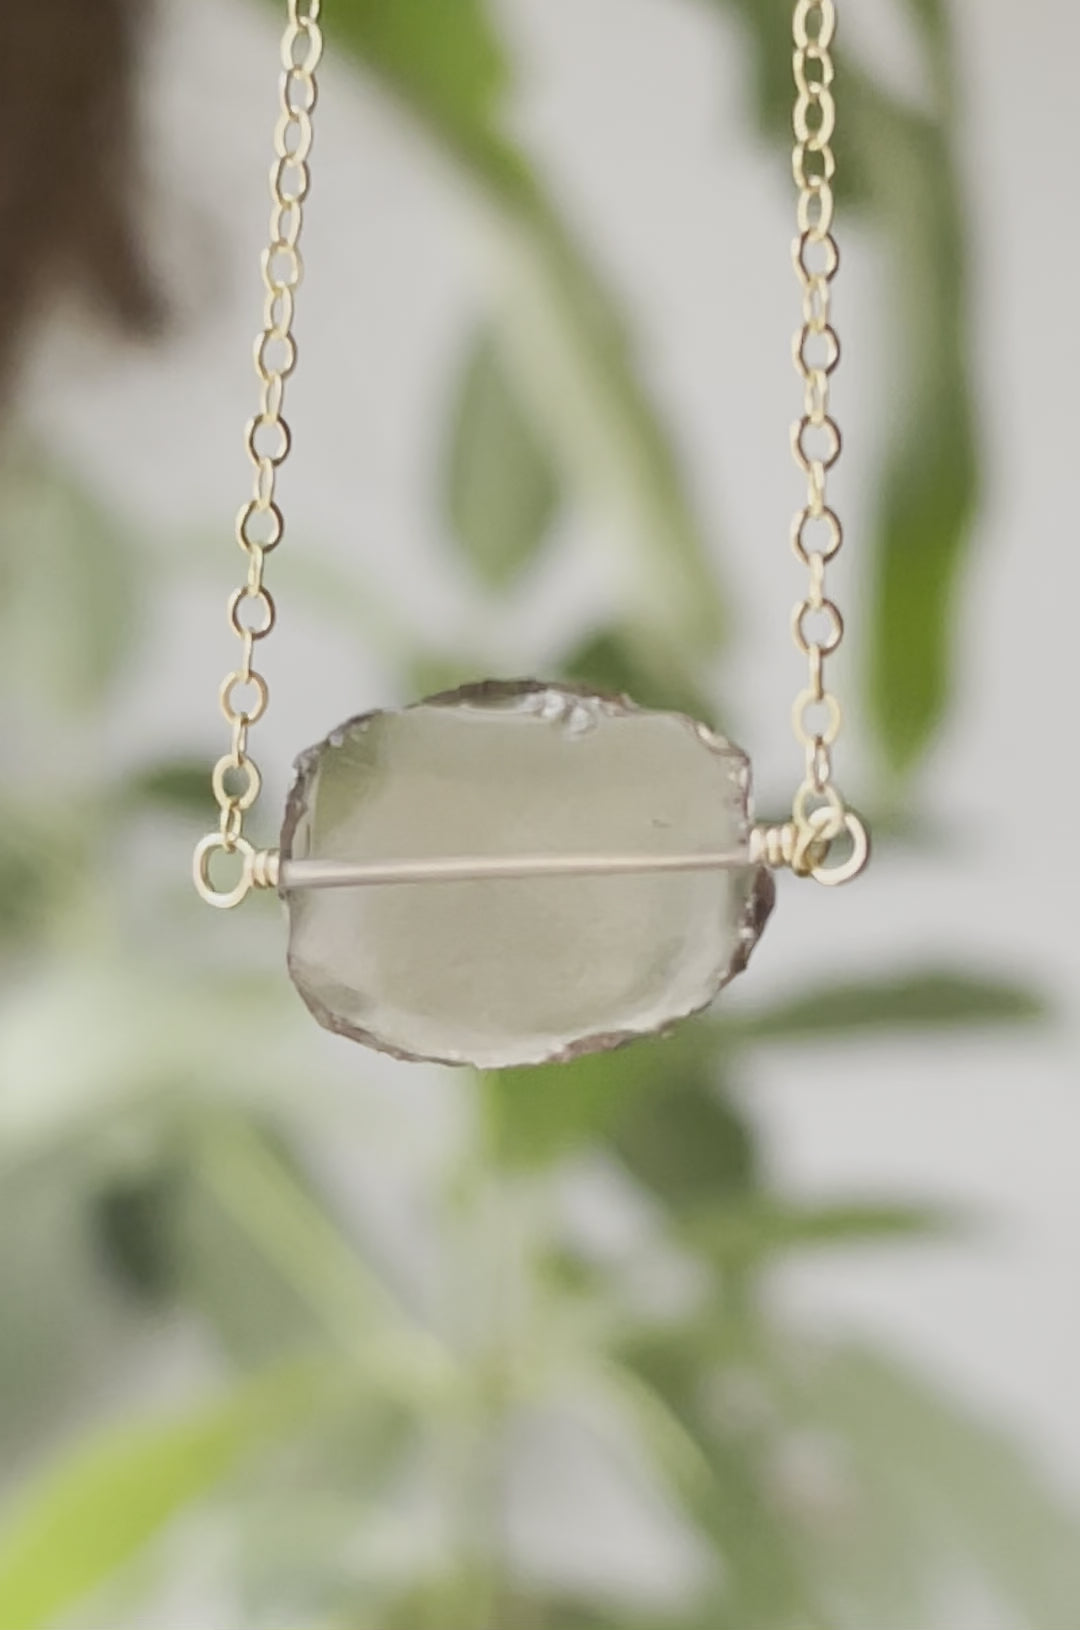 An irregular oval shape, smooth polished Smokey Quartz stone set onto a 14k gold filled chain. The stones edges are raw and irregular. Video.